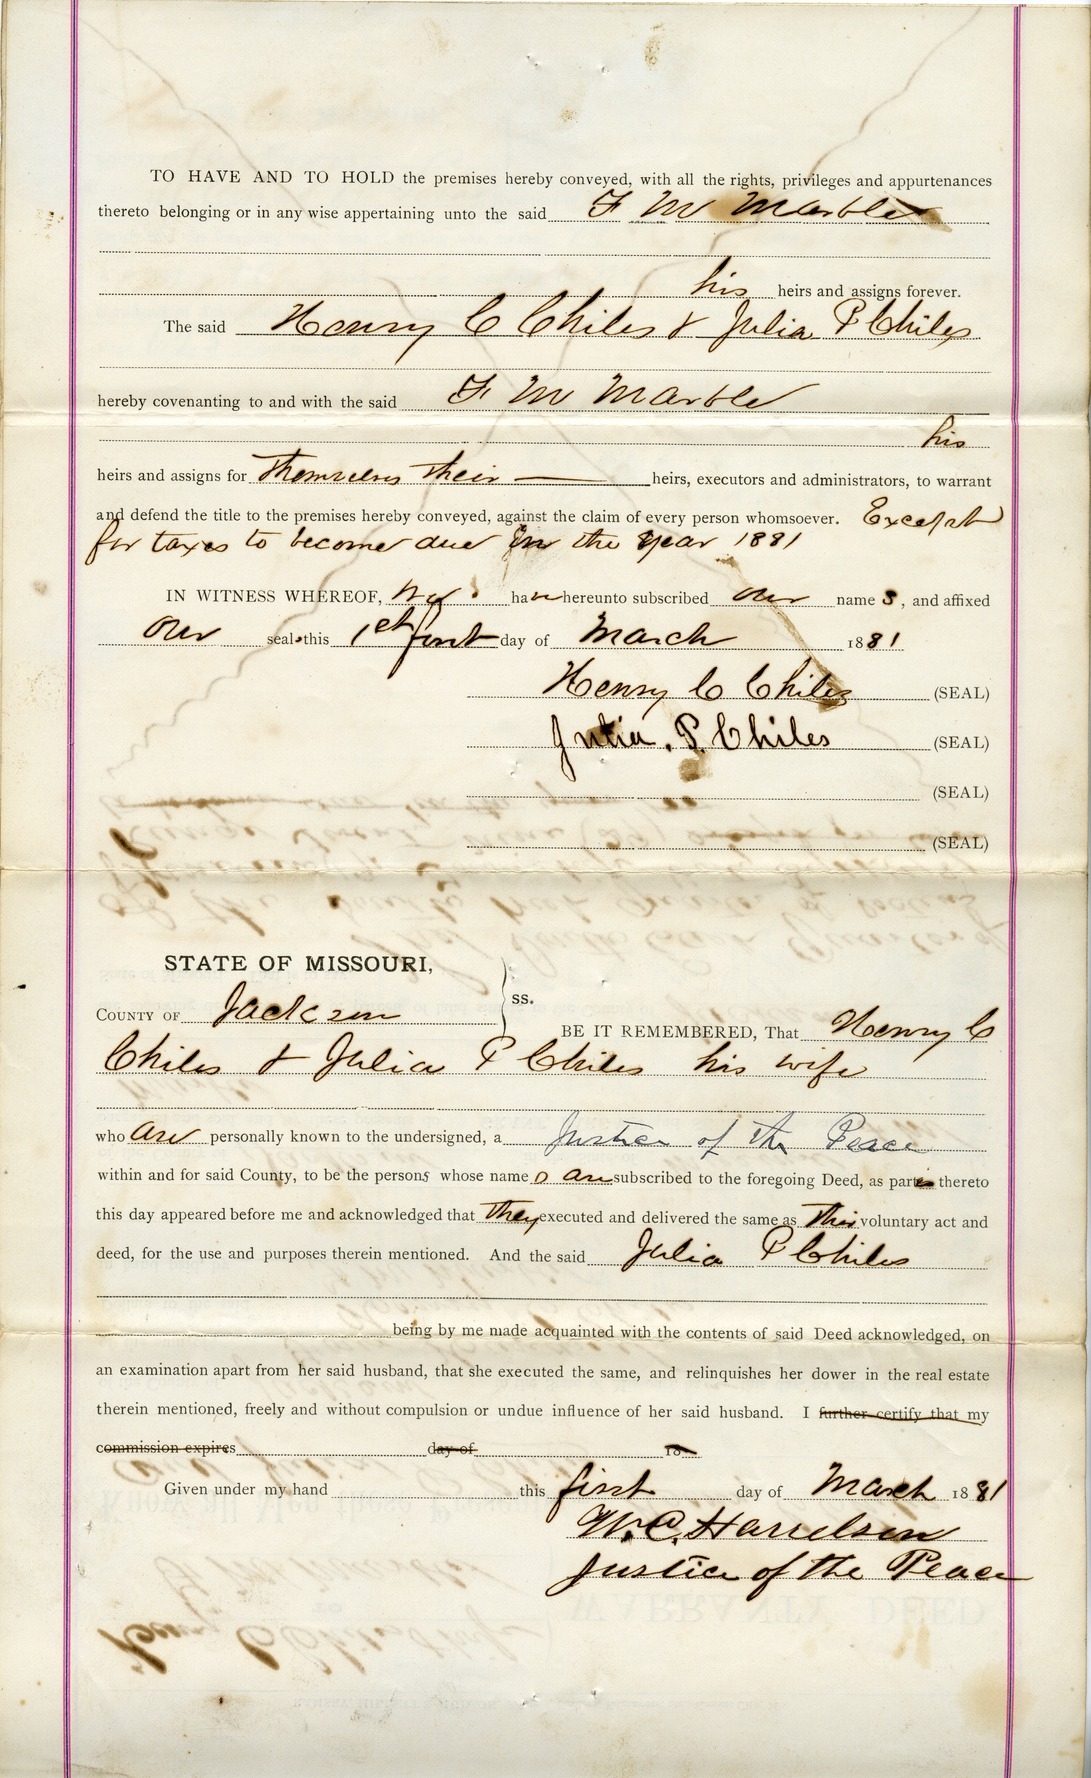 Warranty Deed from Henry C. Chiles and Julia P. Chiles to F. M. Marble